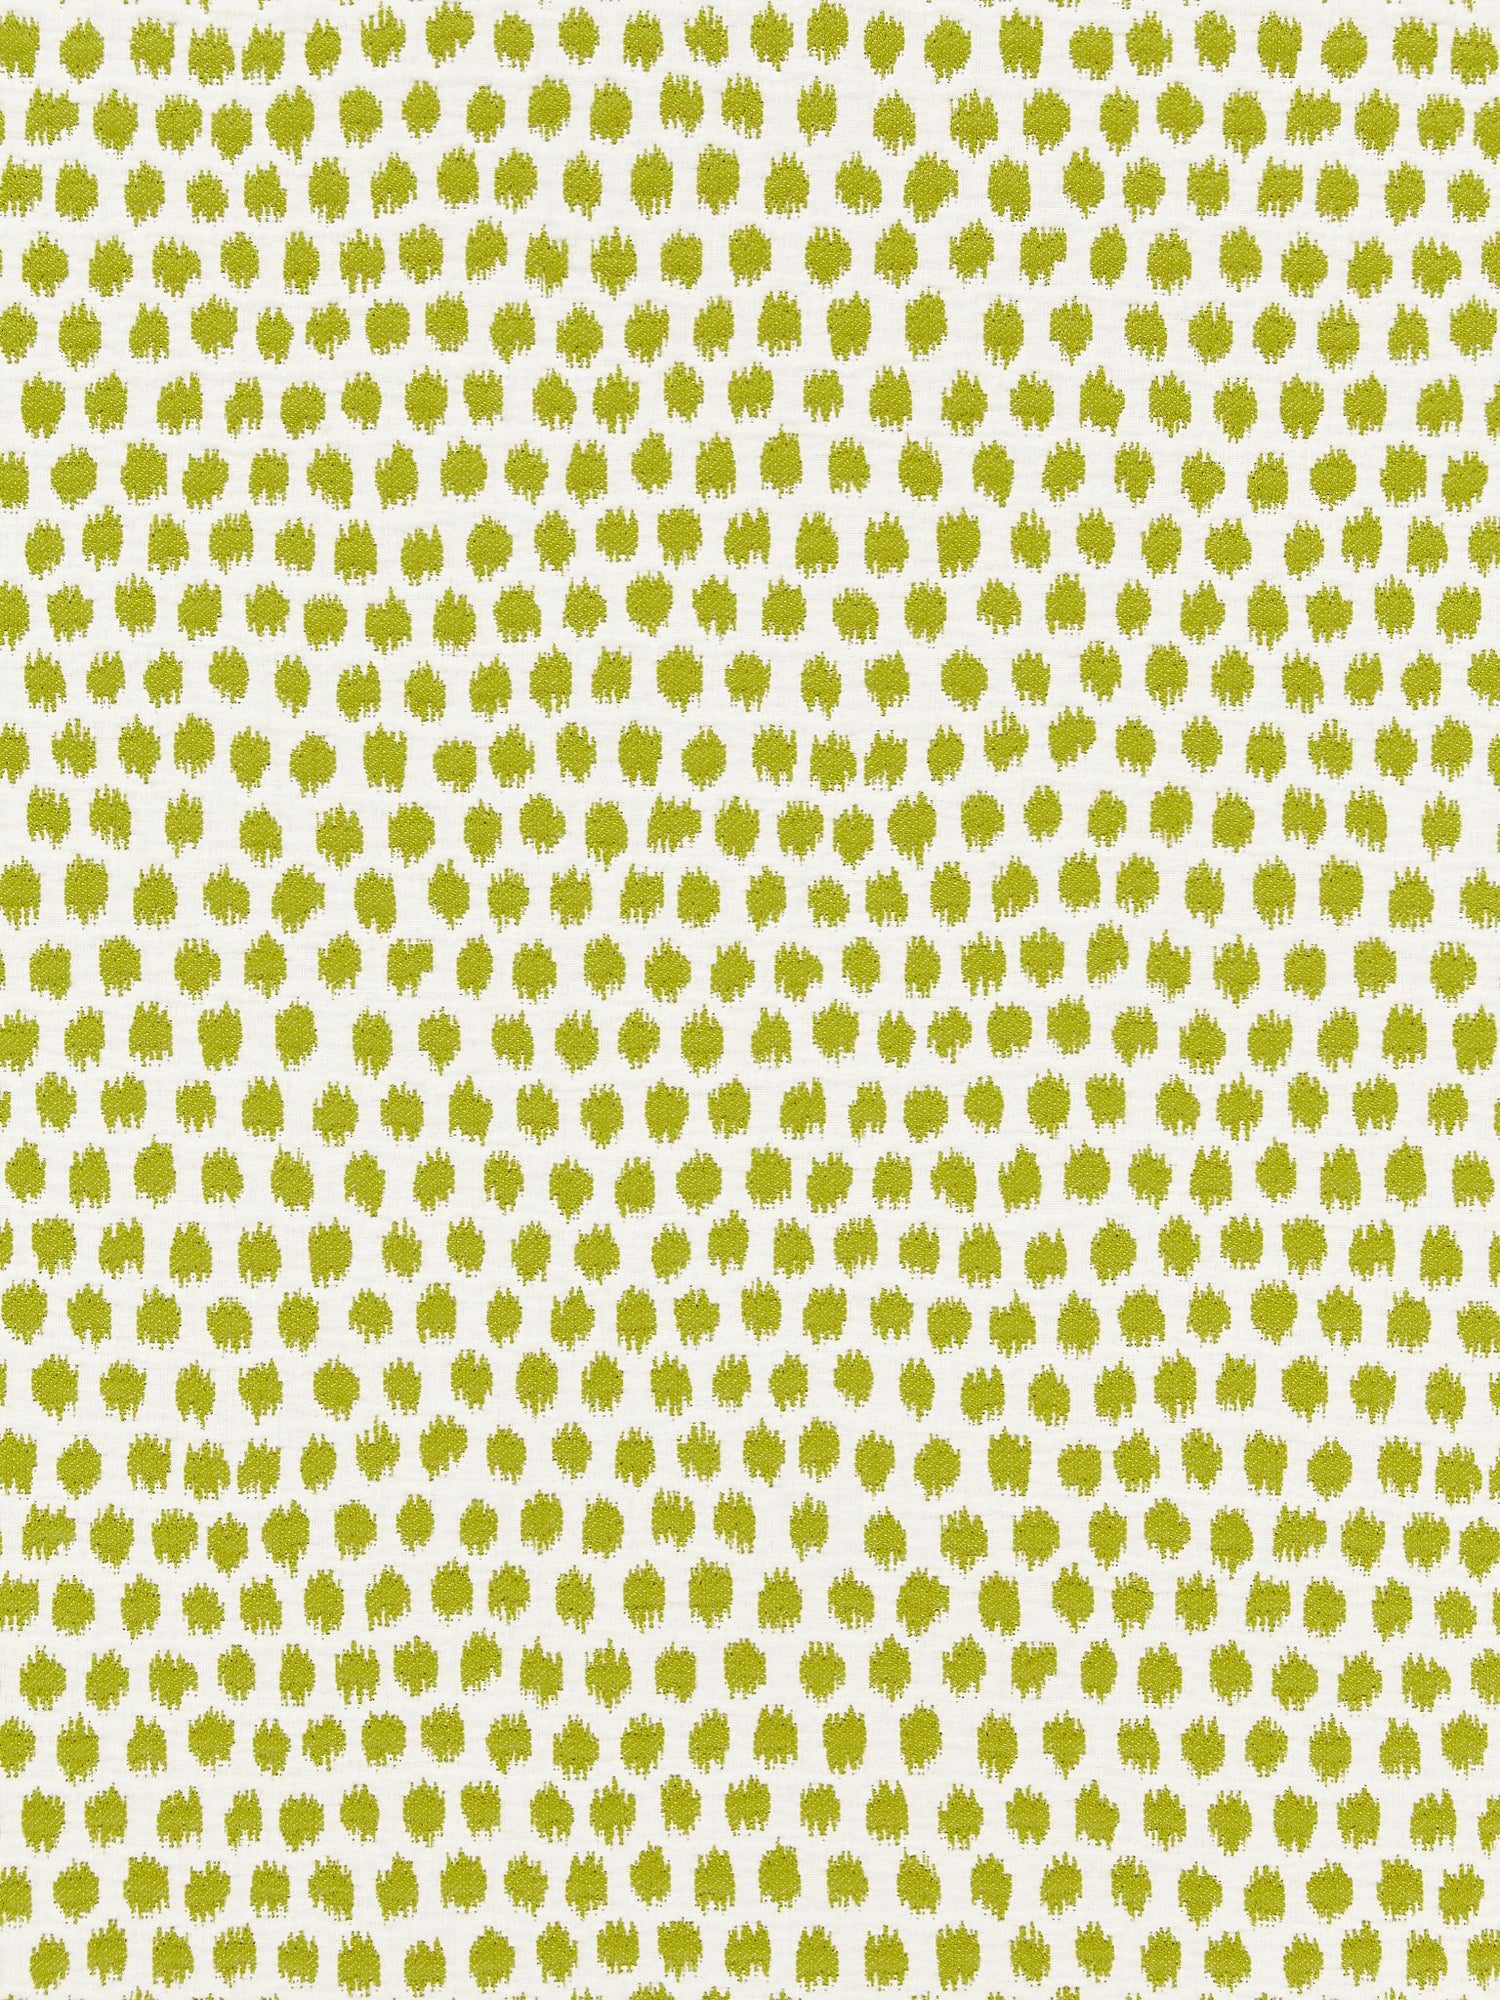 Dot Weave fabric in chartreuse color - pattern number SC 000227182 - by Scalamandre in the Scalamandre Fabrics Book 1 collection